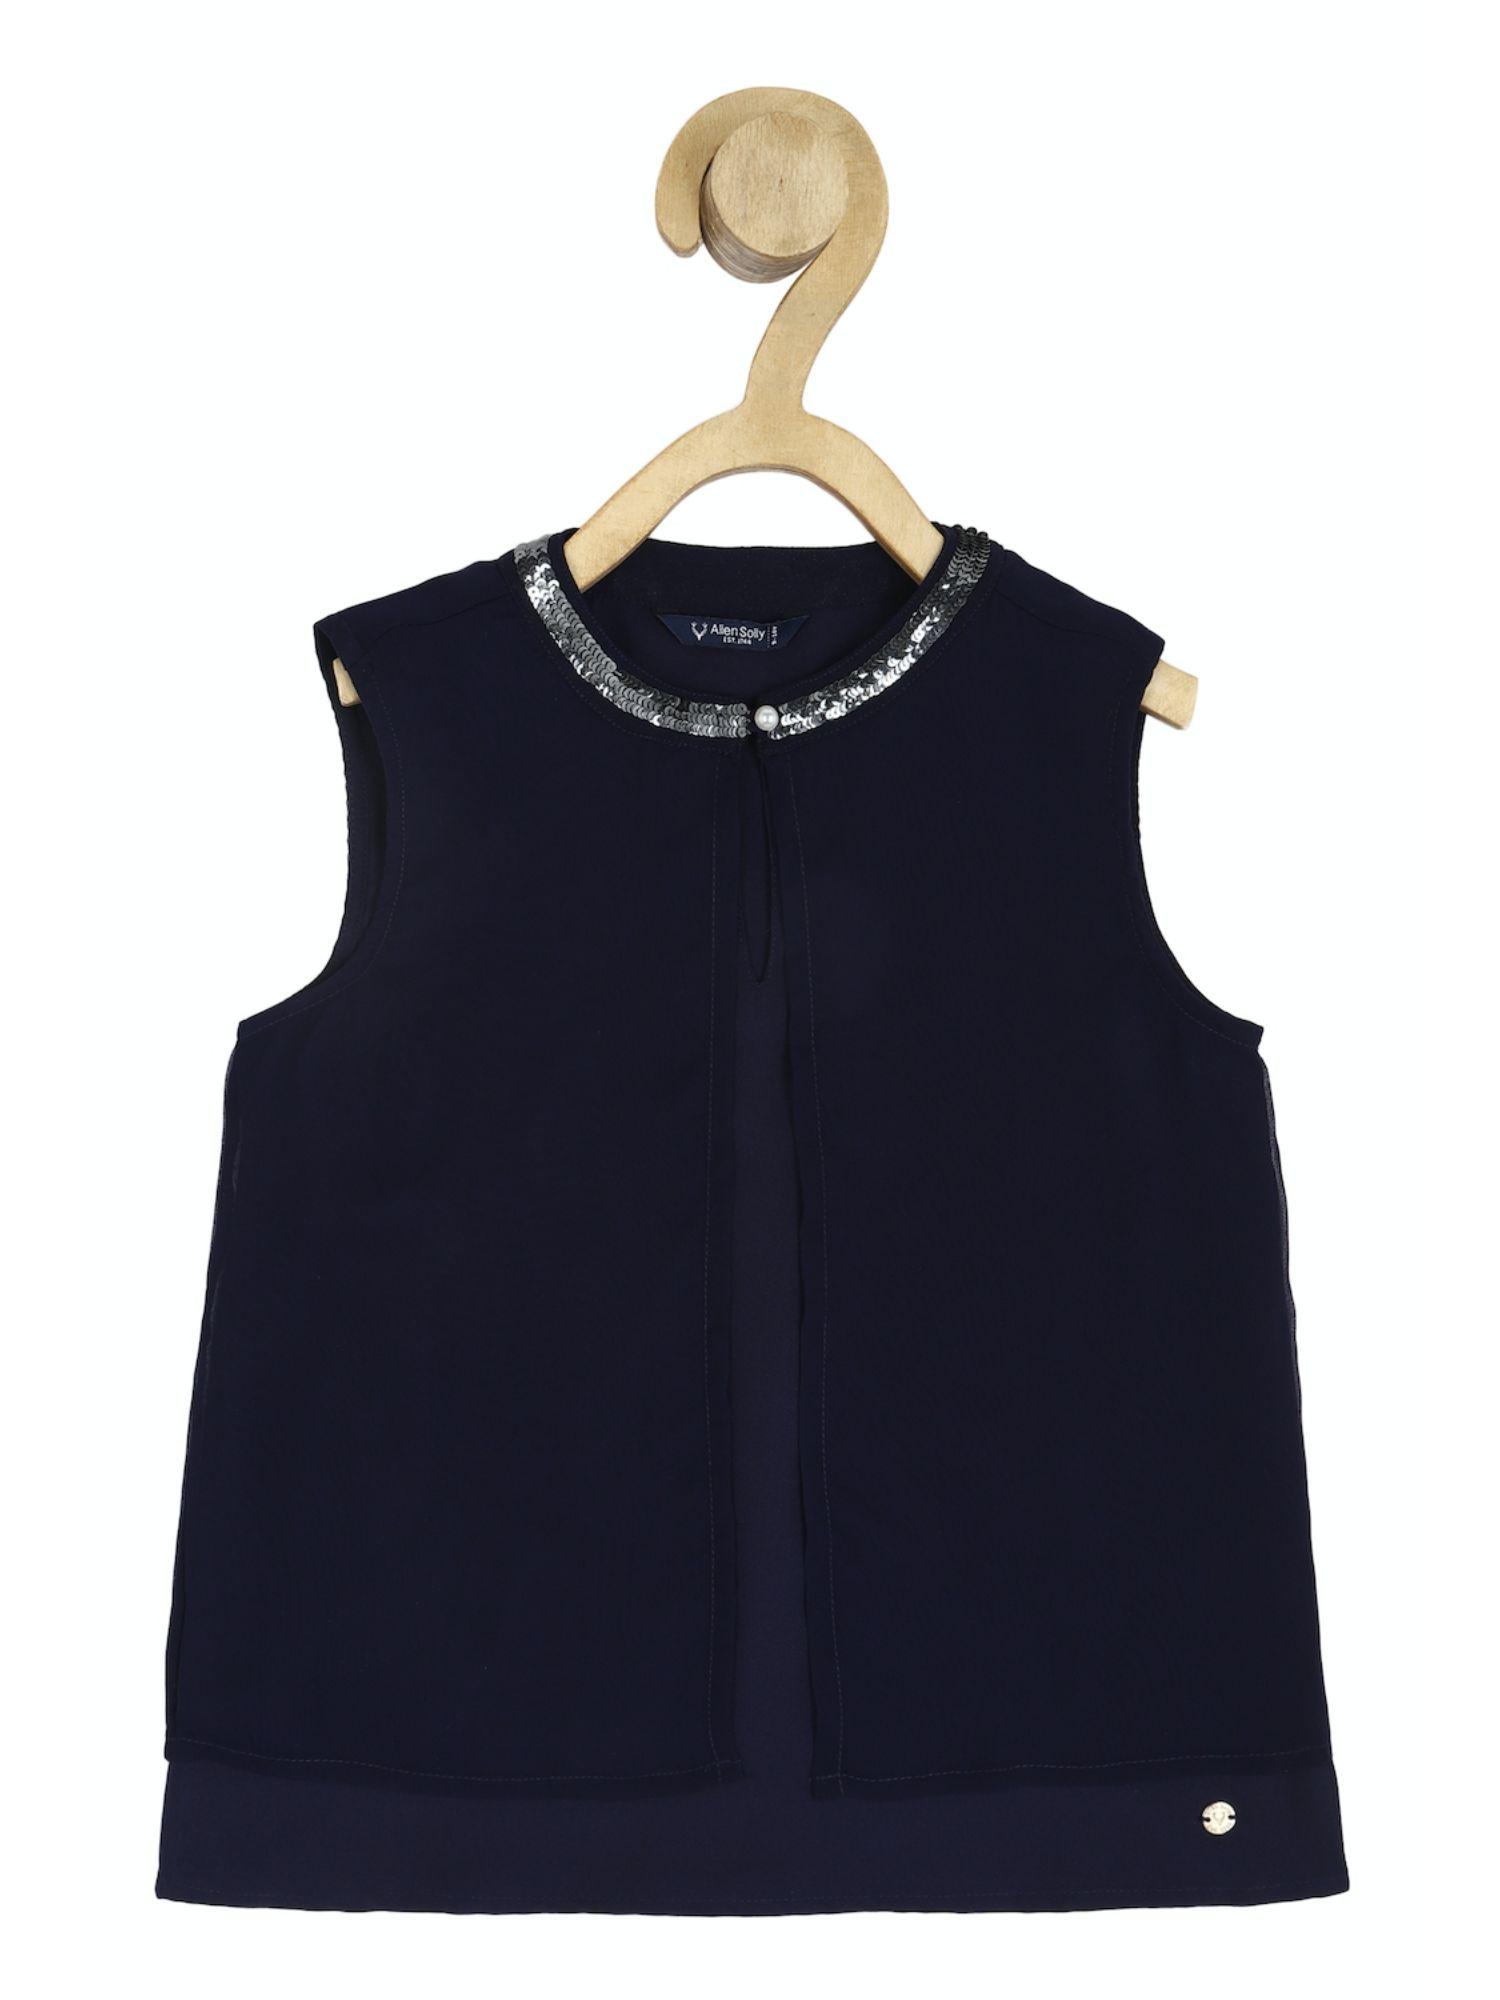 girls navy embellished party top navy blue